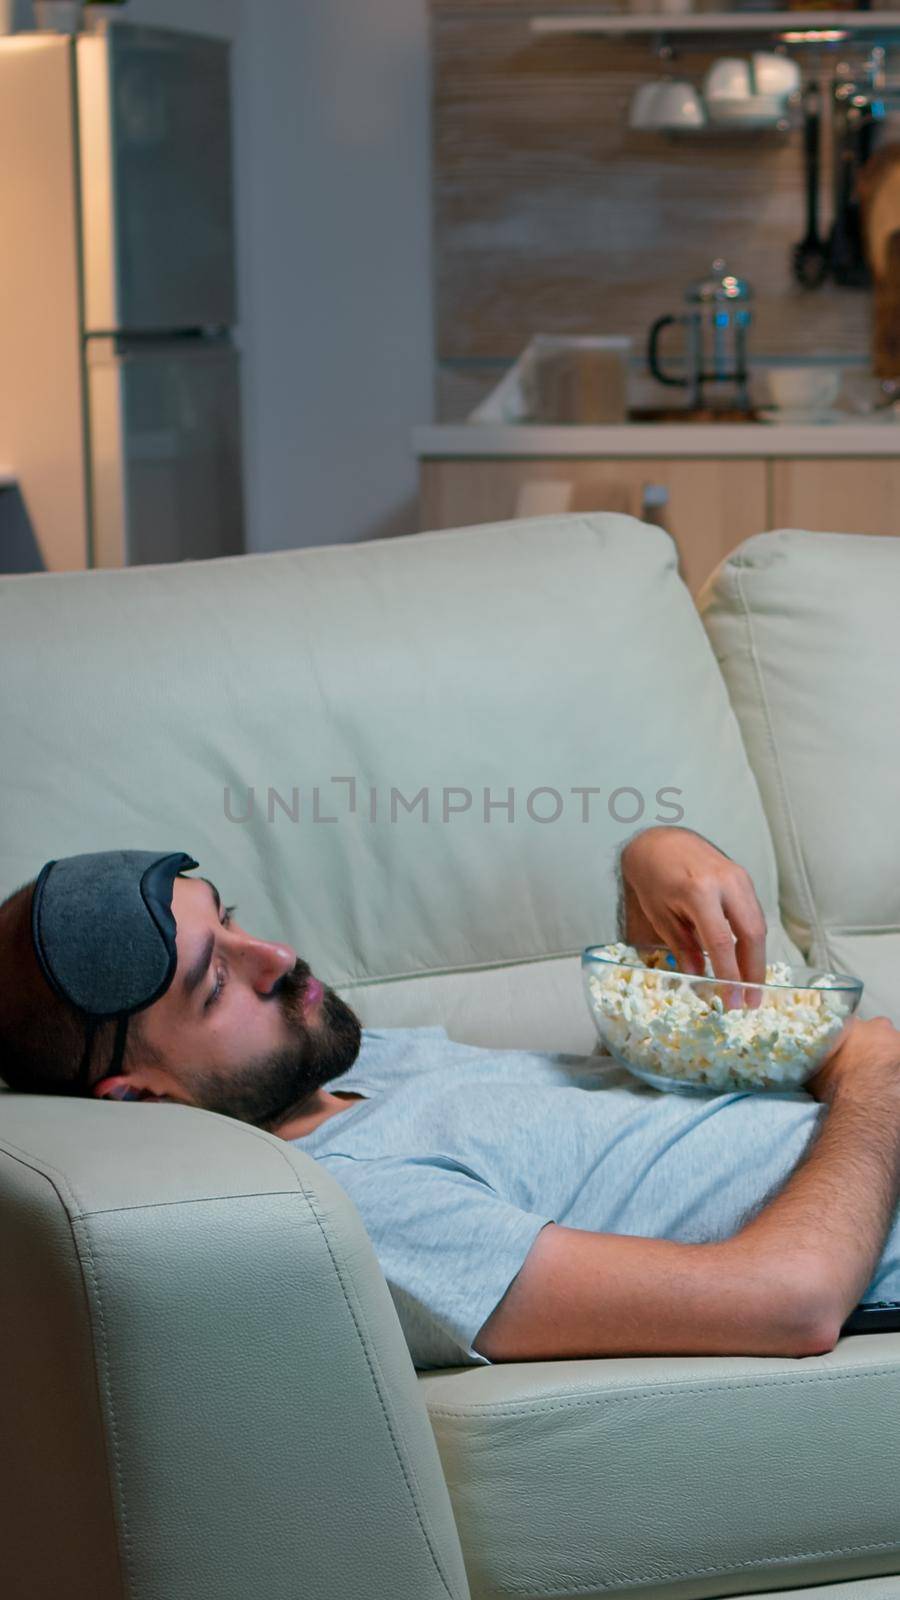 Man lying on sofa, falling asleep in fron of the TV with popcorn bowl in his hands. Tired alone man in living room after a hard day at work